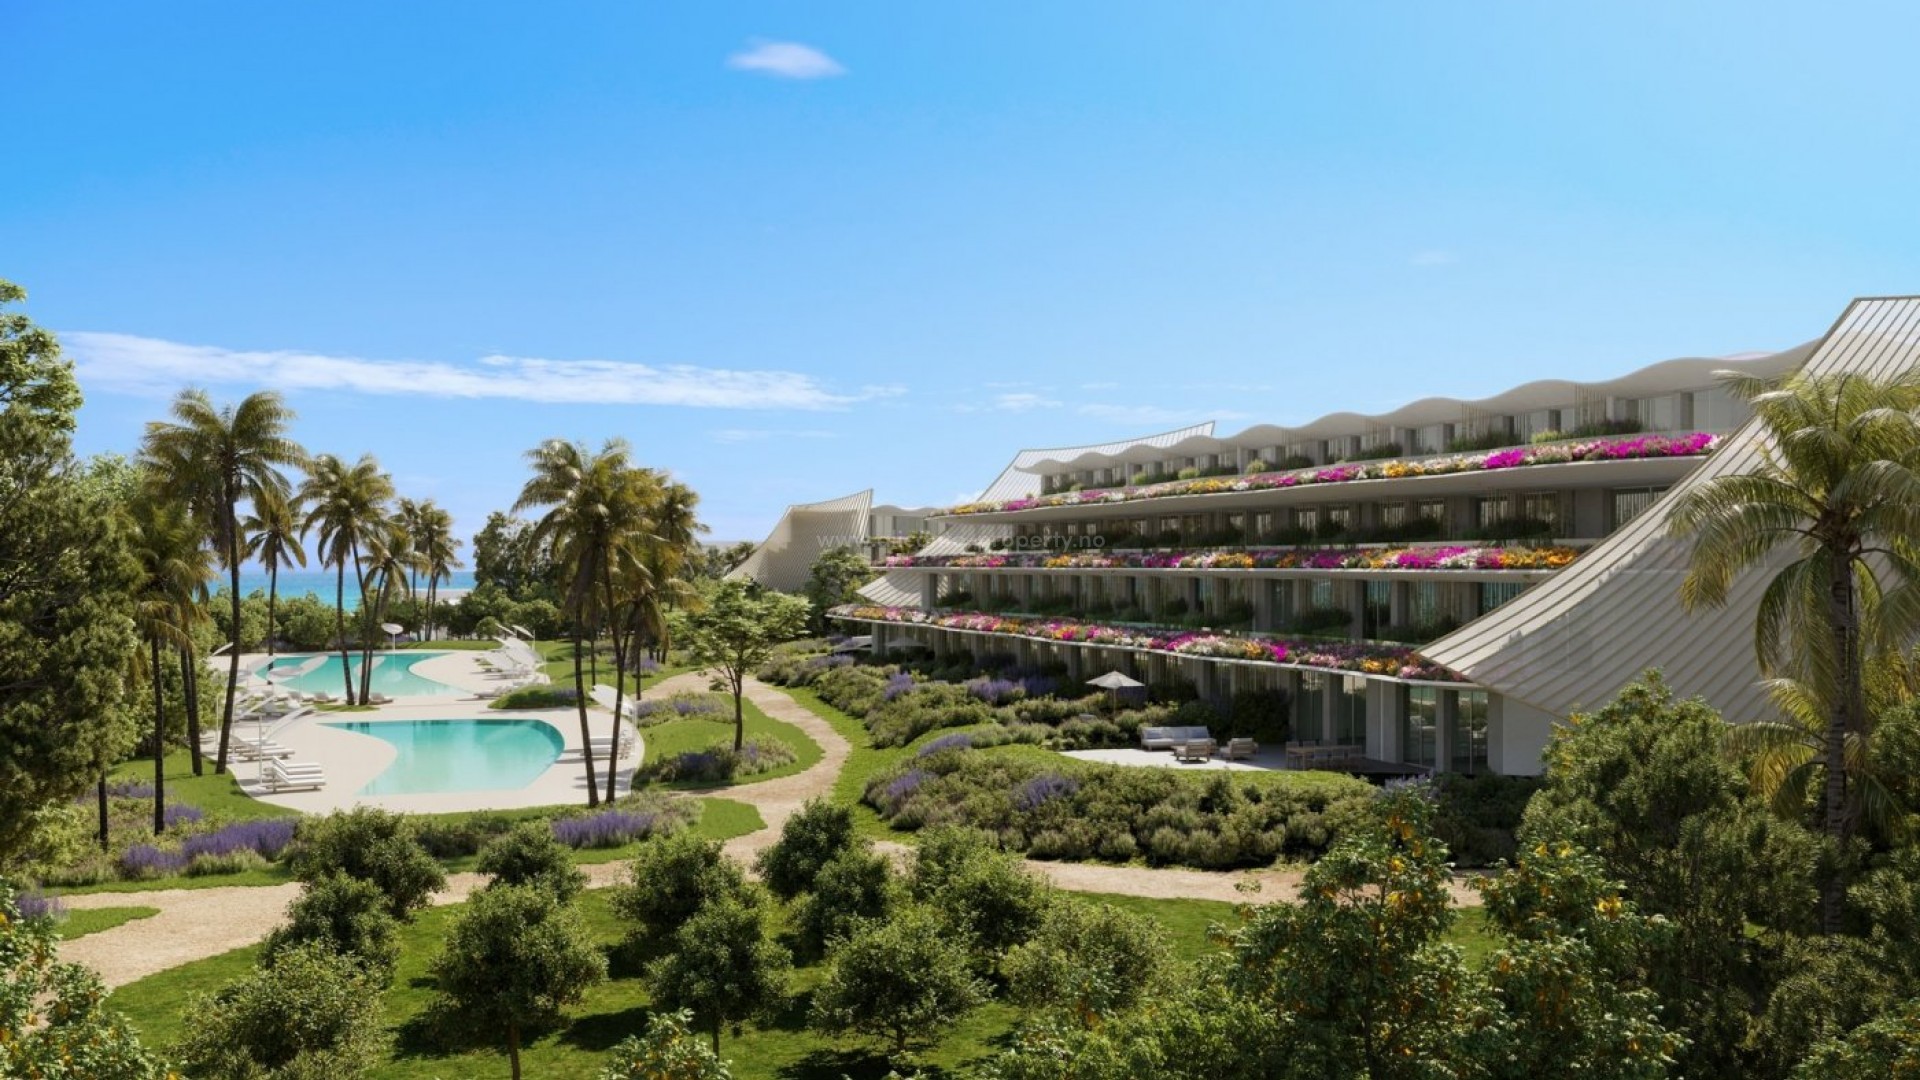 Luxury complex of apartments/penthouses in Albir, 3 bedrooms, 2 bathrooms, some with terrace, private garden or large private solarium, shared pool, just steps from the sea.